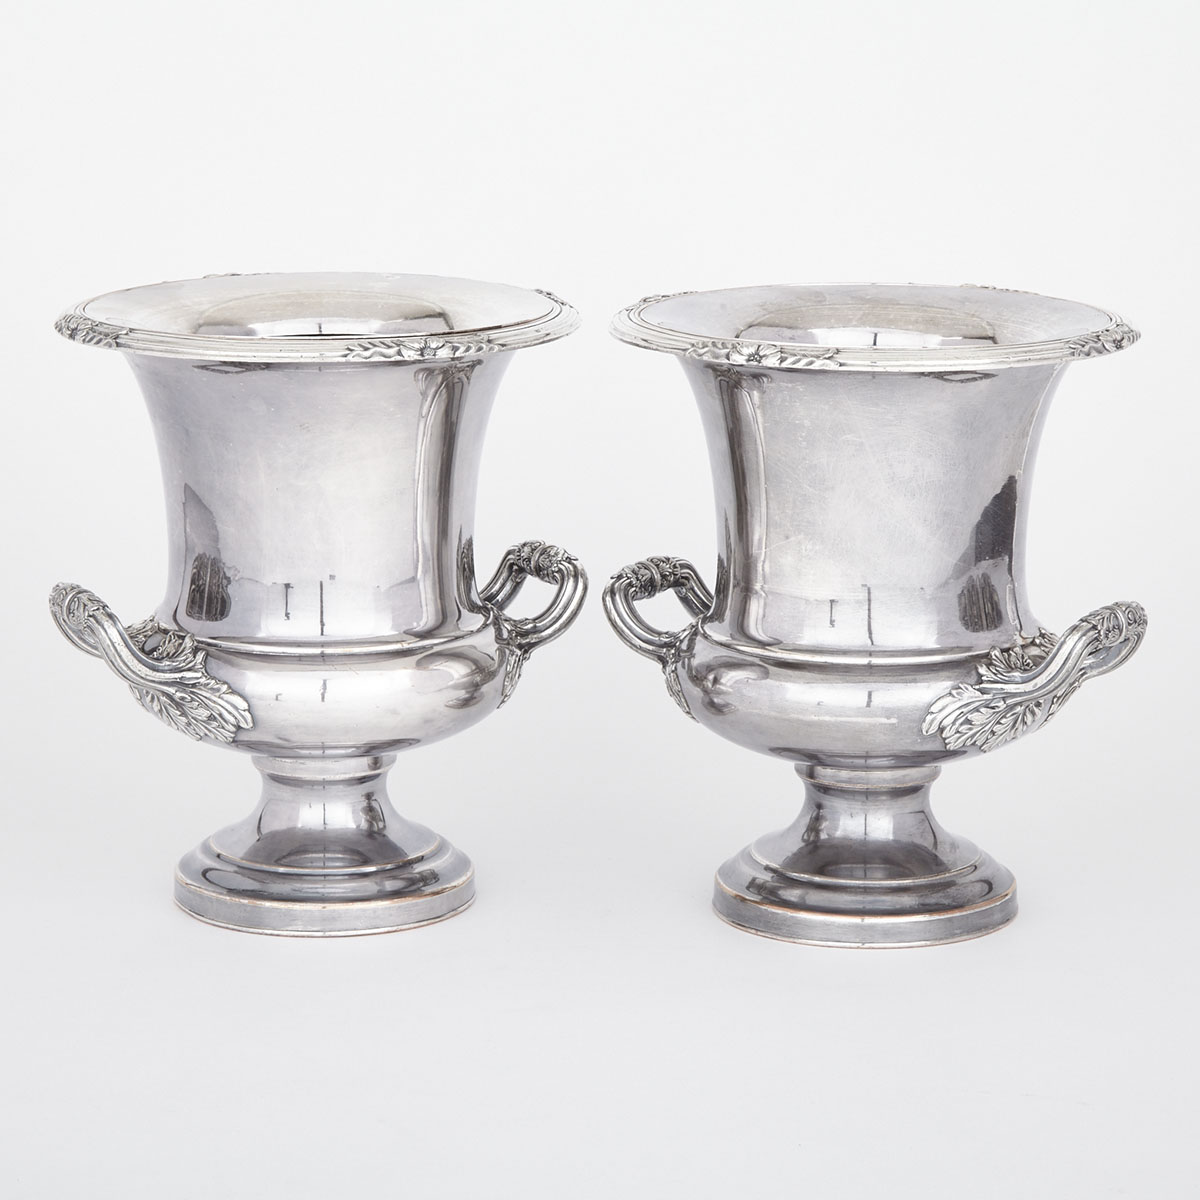 Pair of Old Sheffield Plate Wine Coolers & Liners, Waterhouse, Hatfield & Co., c.1835